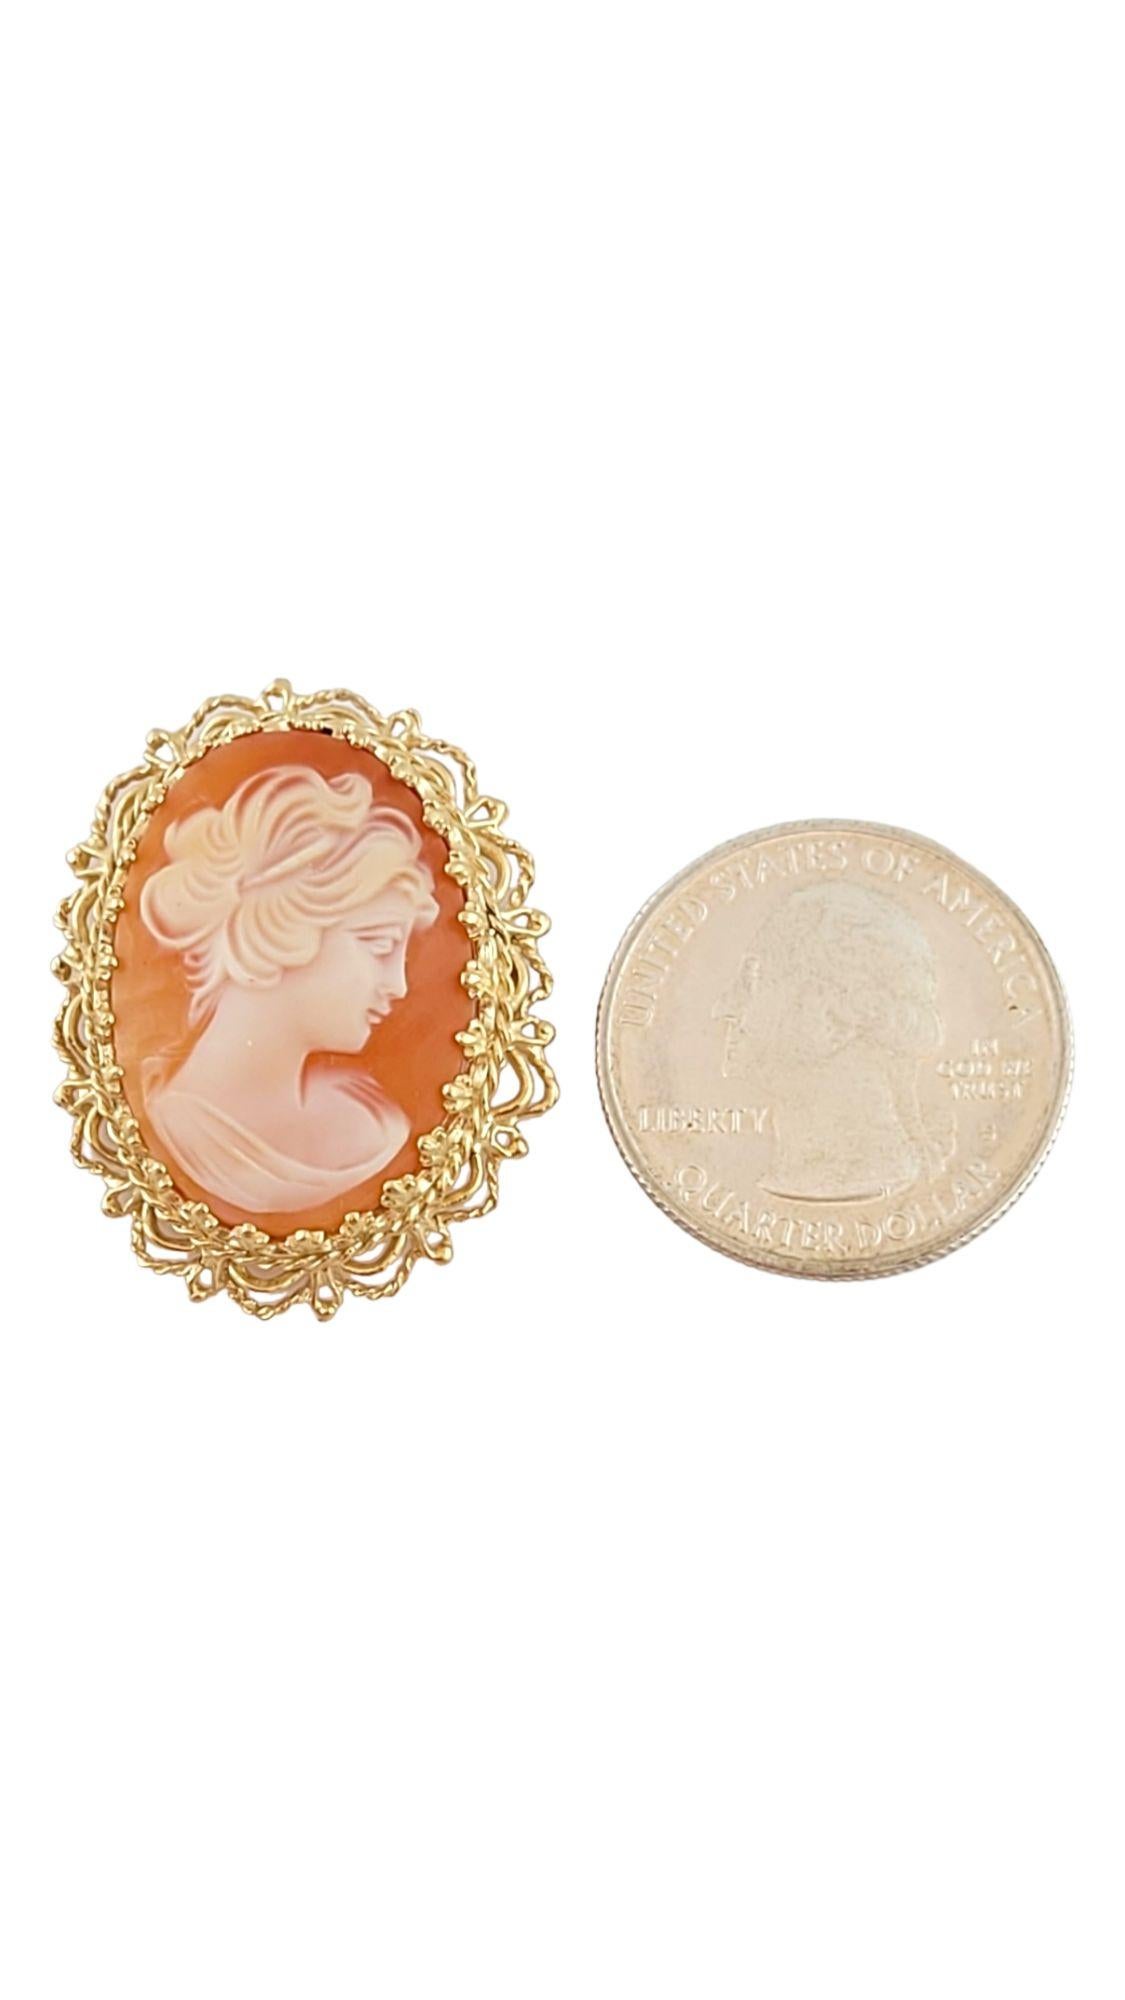 This gorgeous cameo pin is set in 14K yellow gold and doubles as a pendant as well!

Size: 33.3mm X 25.9mm X 9.4mm

Weight: 6.7 g/ 4.3 dwt

Hallmark: 14K

*Chain not included*

Very good condition, professionally polished.

Will come packaged in a